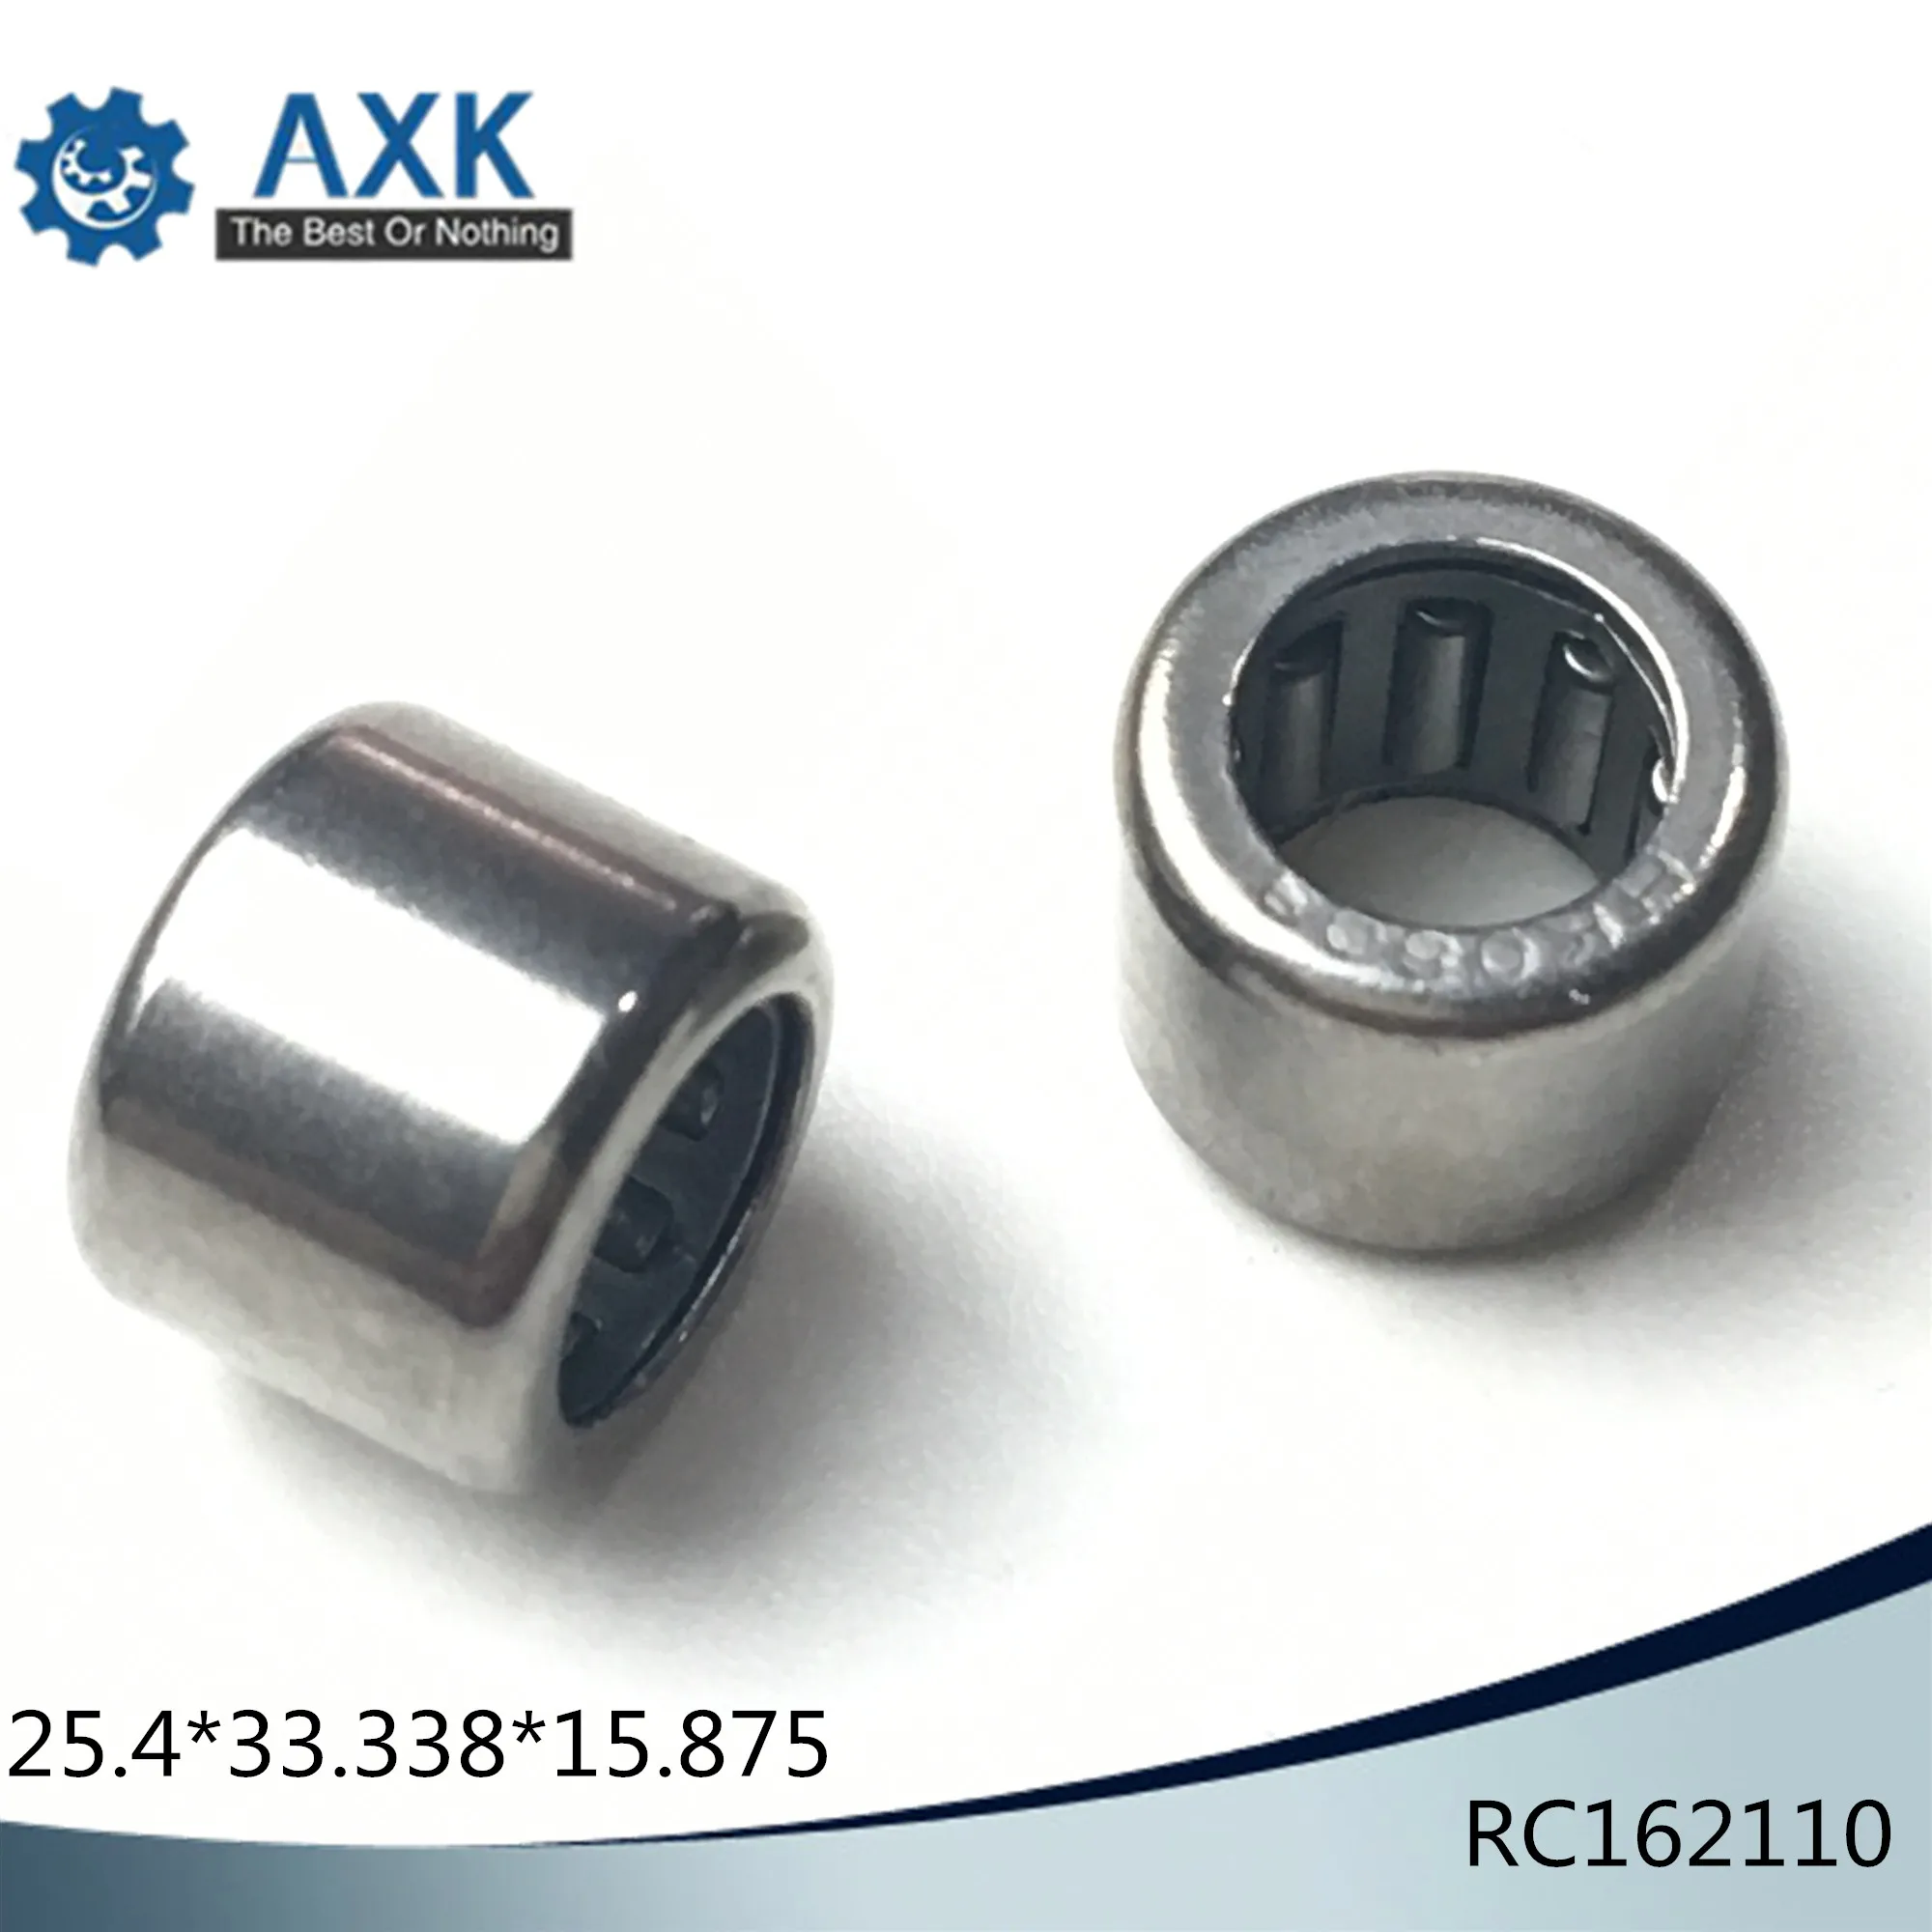 RC162110 Inch Size One Way Drawn Cup Needle Bearing 25.4*33.338*15.875 mm ( 5 Pcs ) Cam Clutches RC 162110 Back Stops Bearings